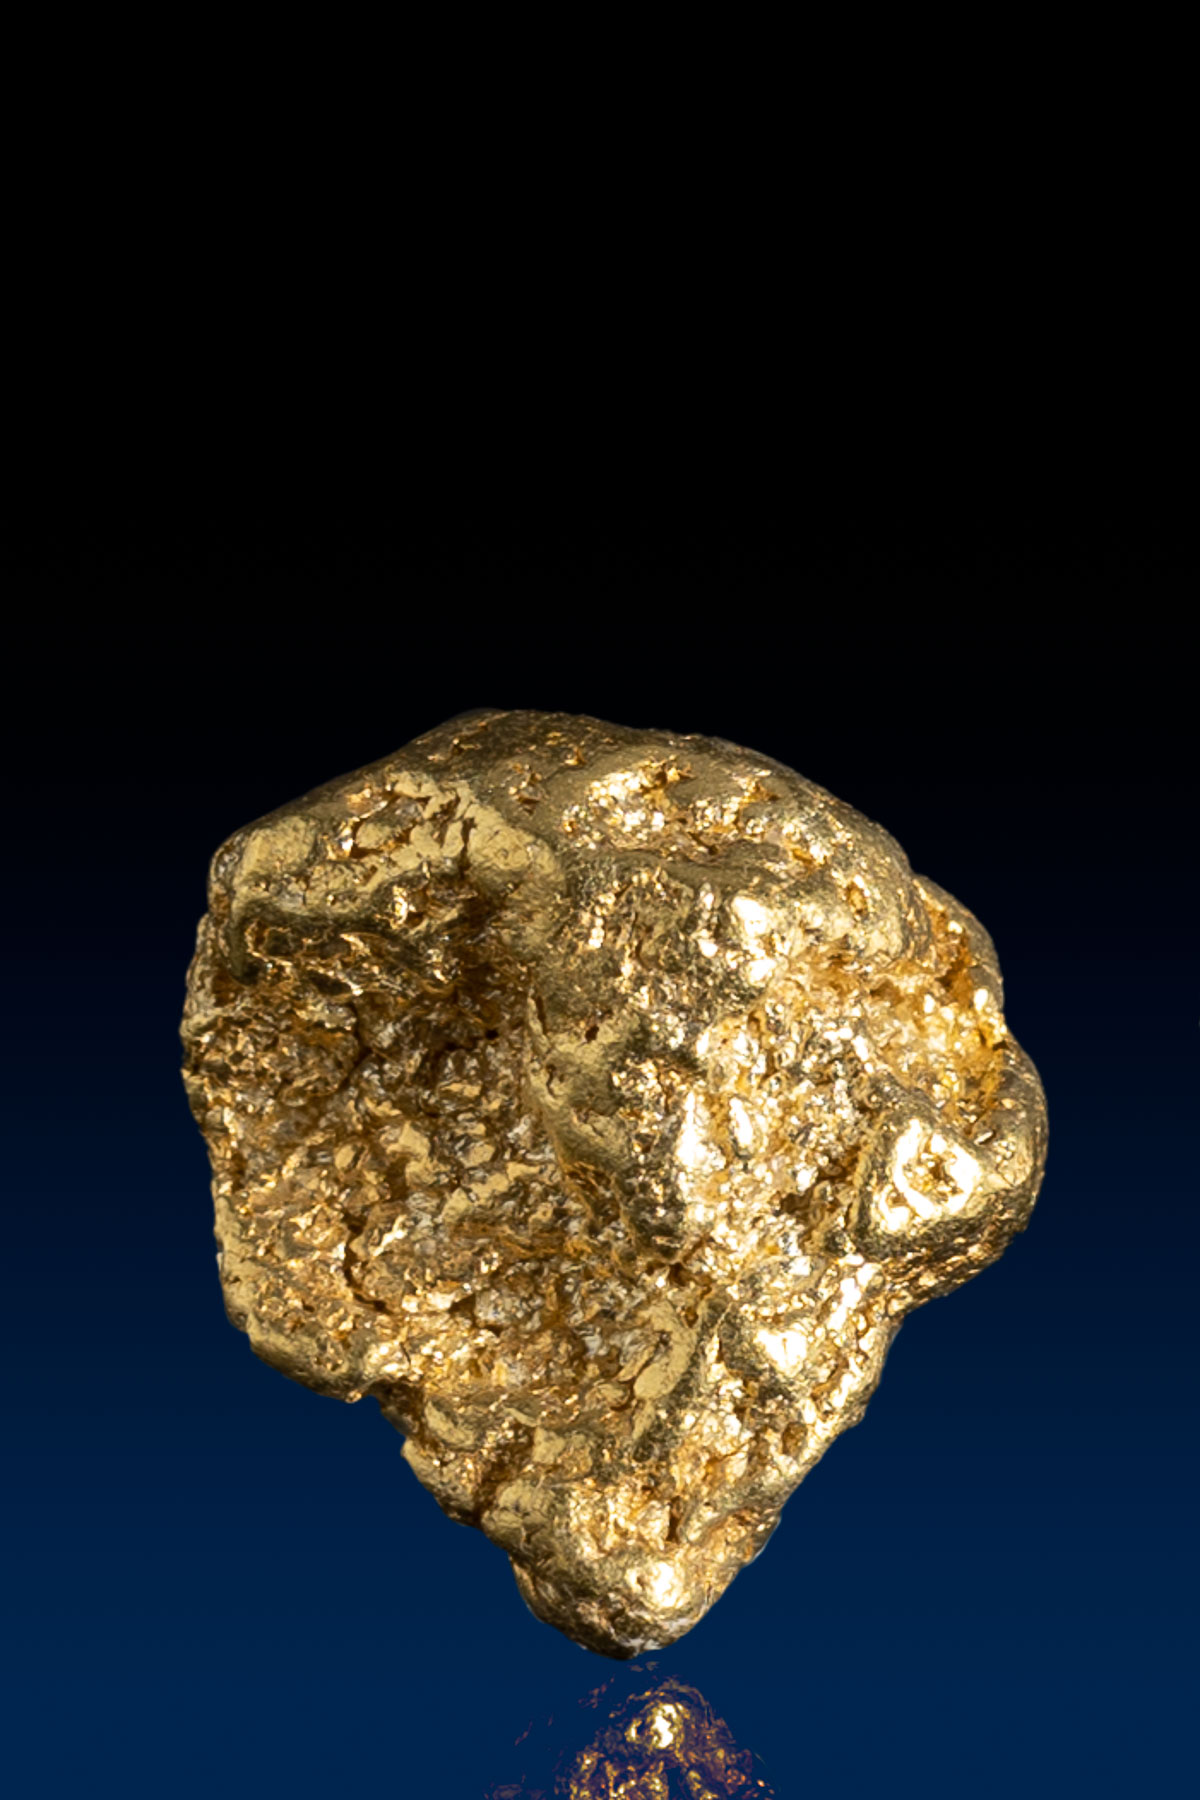 Chunky and Beautiful Gold nugget from the Alaska 2021 Season